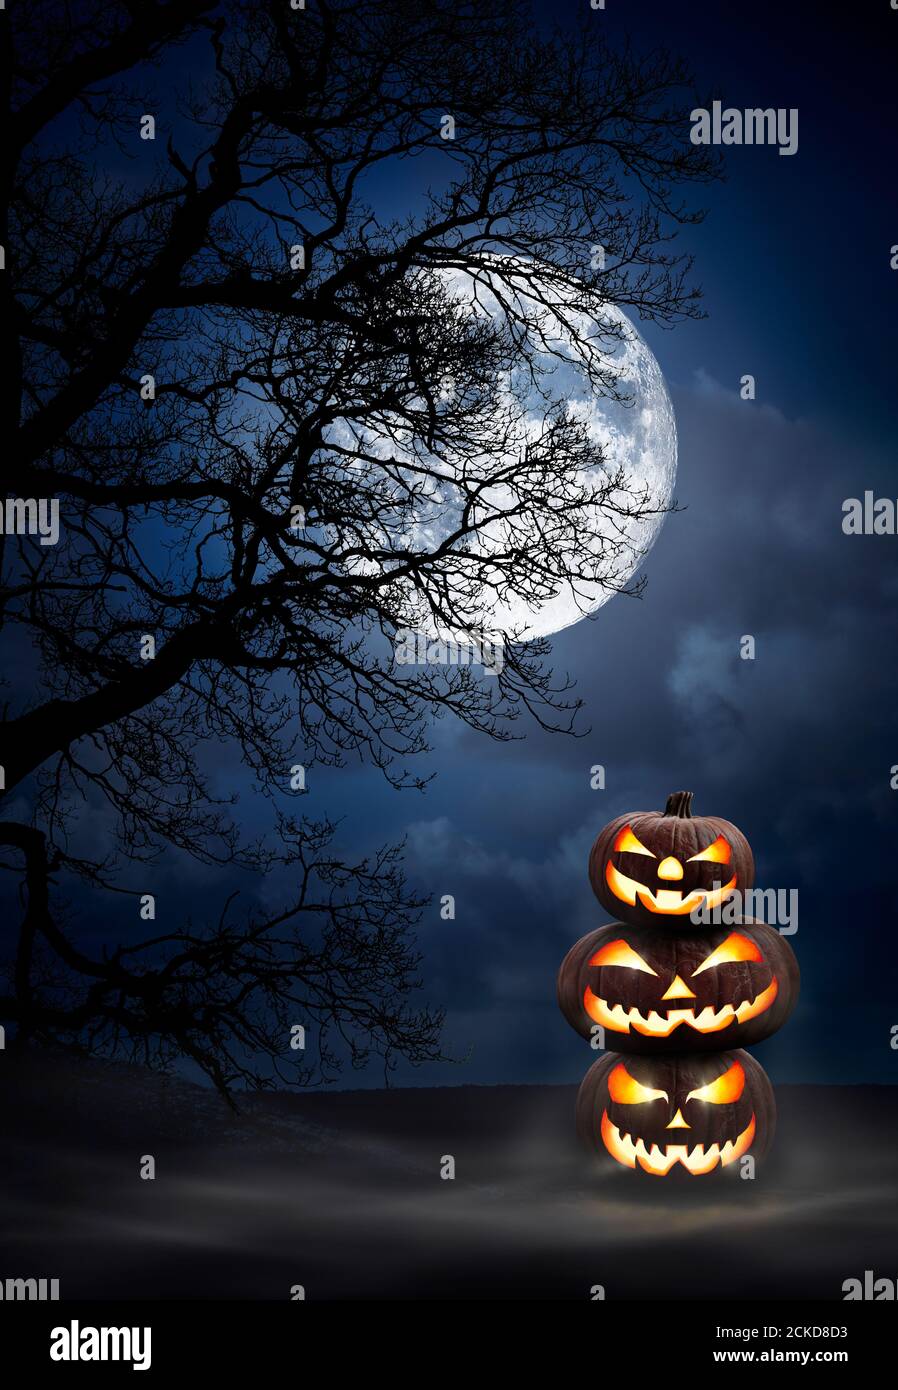 A Pile Of Three Spooky Halloween Pumpkins Jack O Lantern With Evil Face And Eyes Under The Silhouette Of A Tree At Night With A Full Moon And Misty Stock Photo